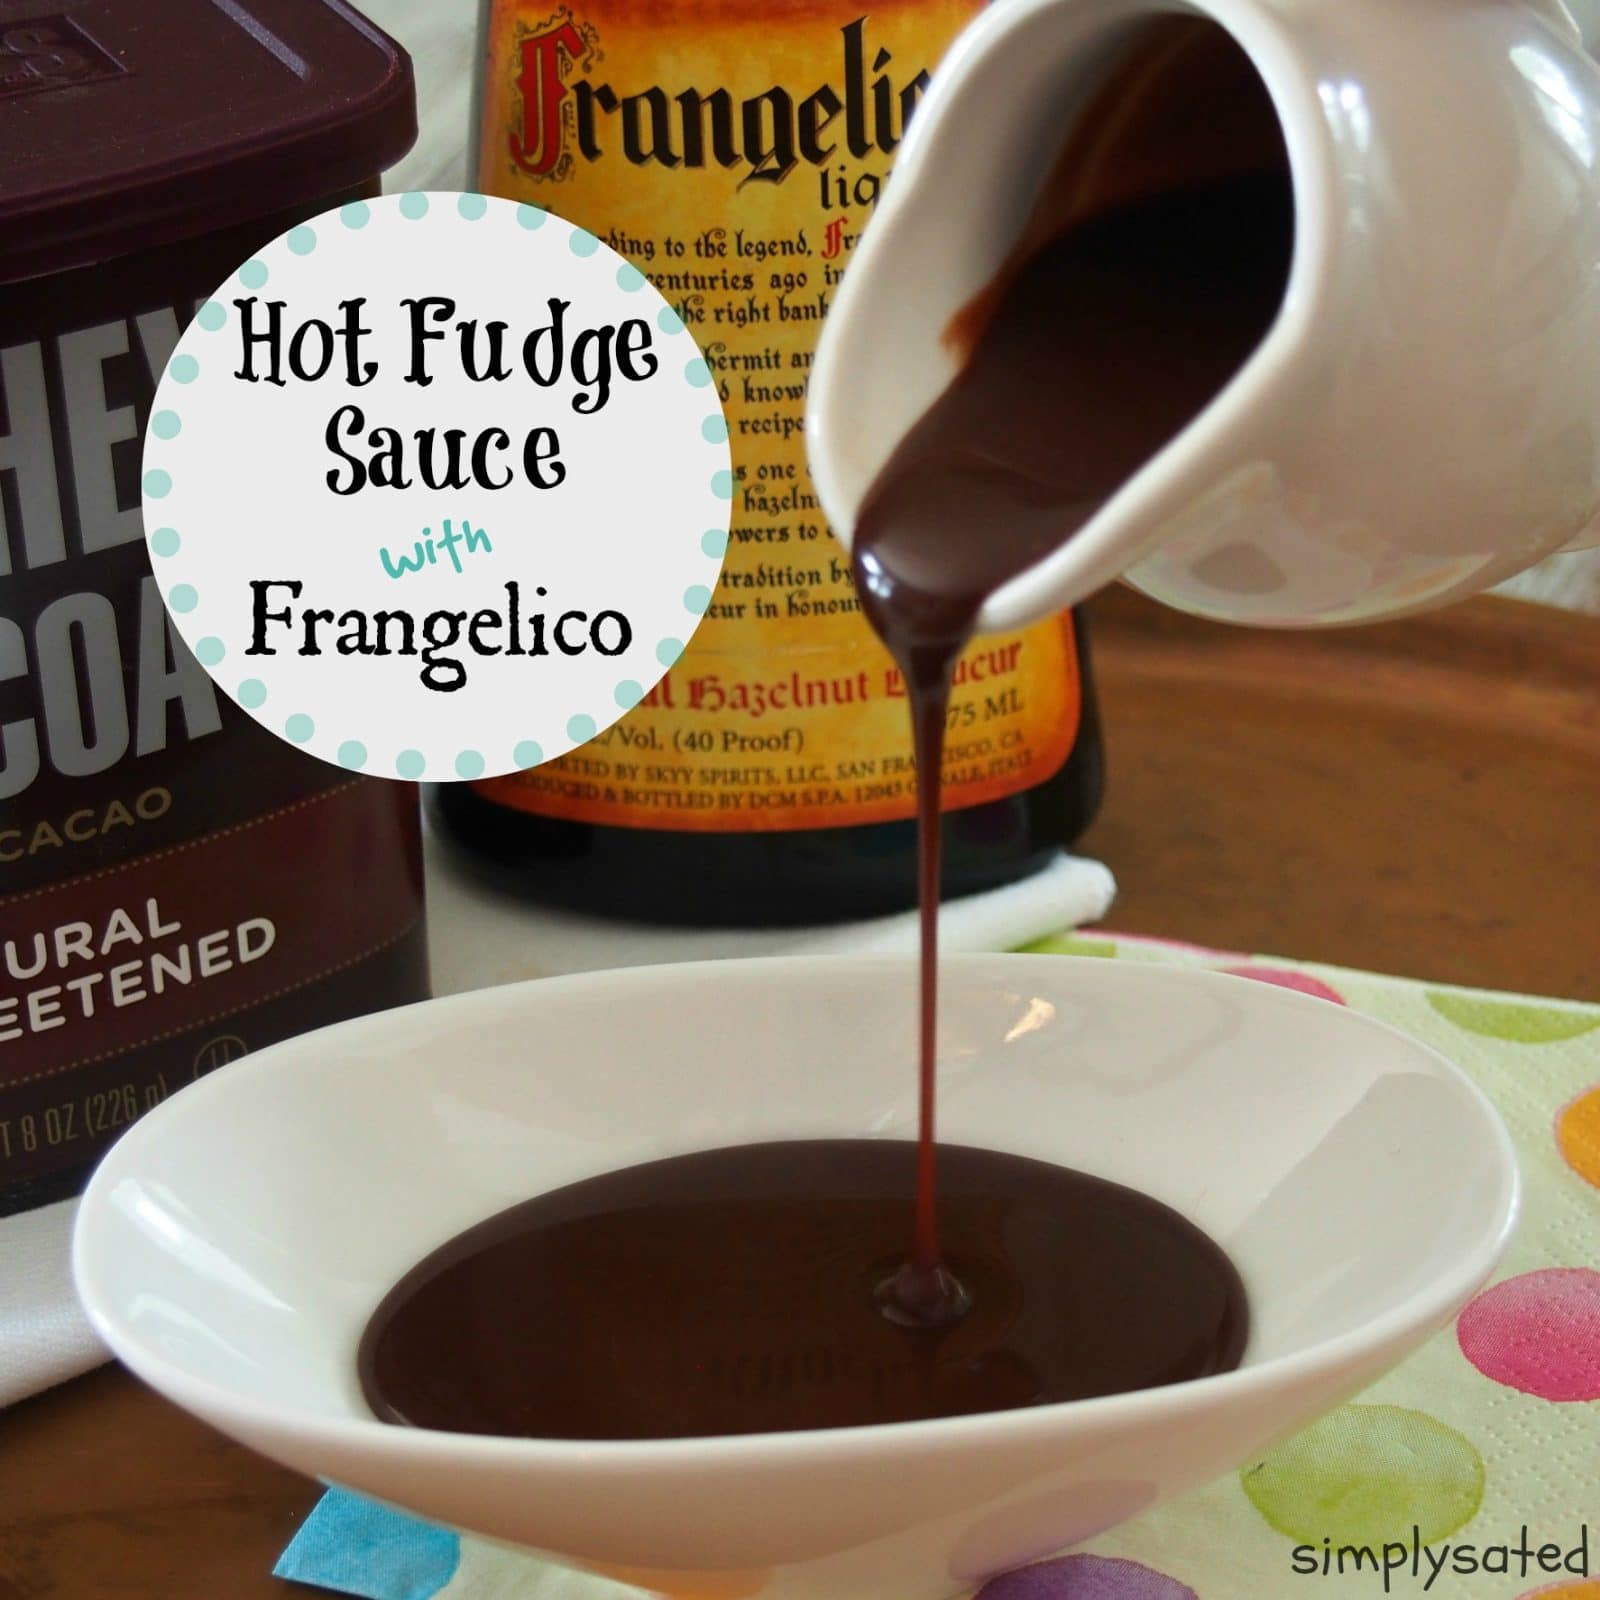 Homemade Hot Fudge Sauce with Frangelico is creamy, chocolatey perfection Scrumptious!! www.simplysated.com